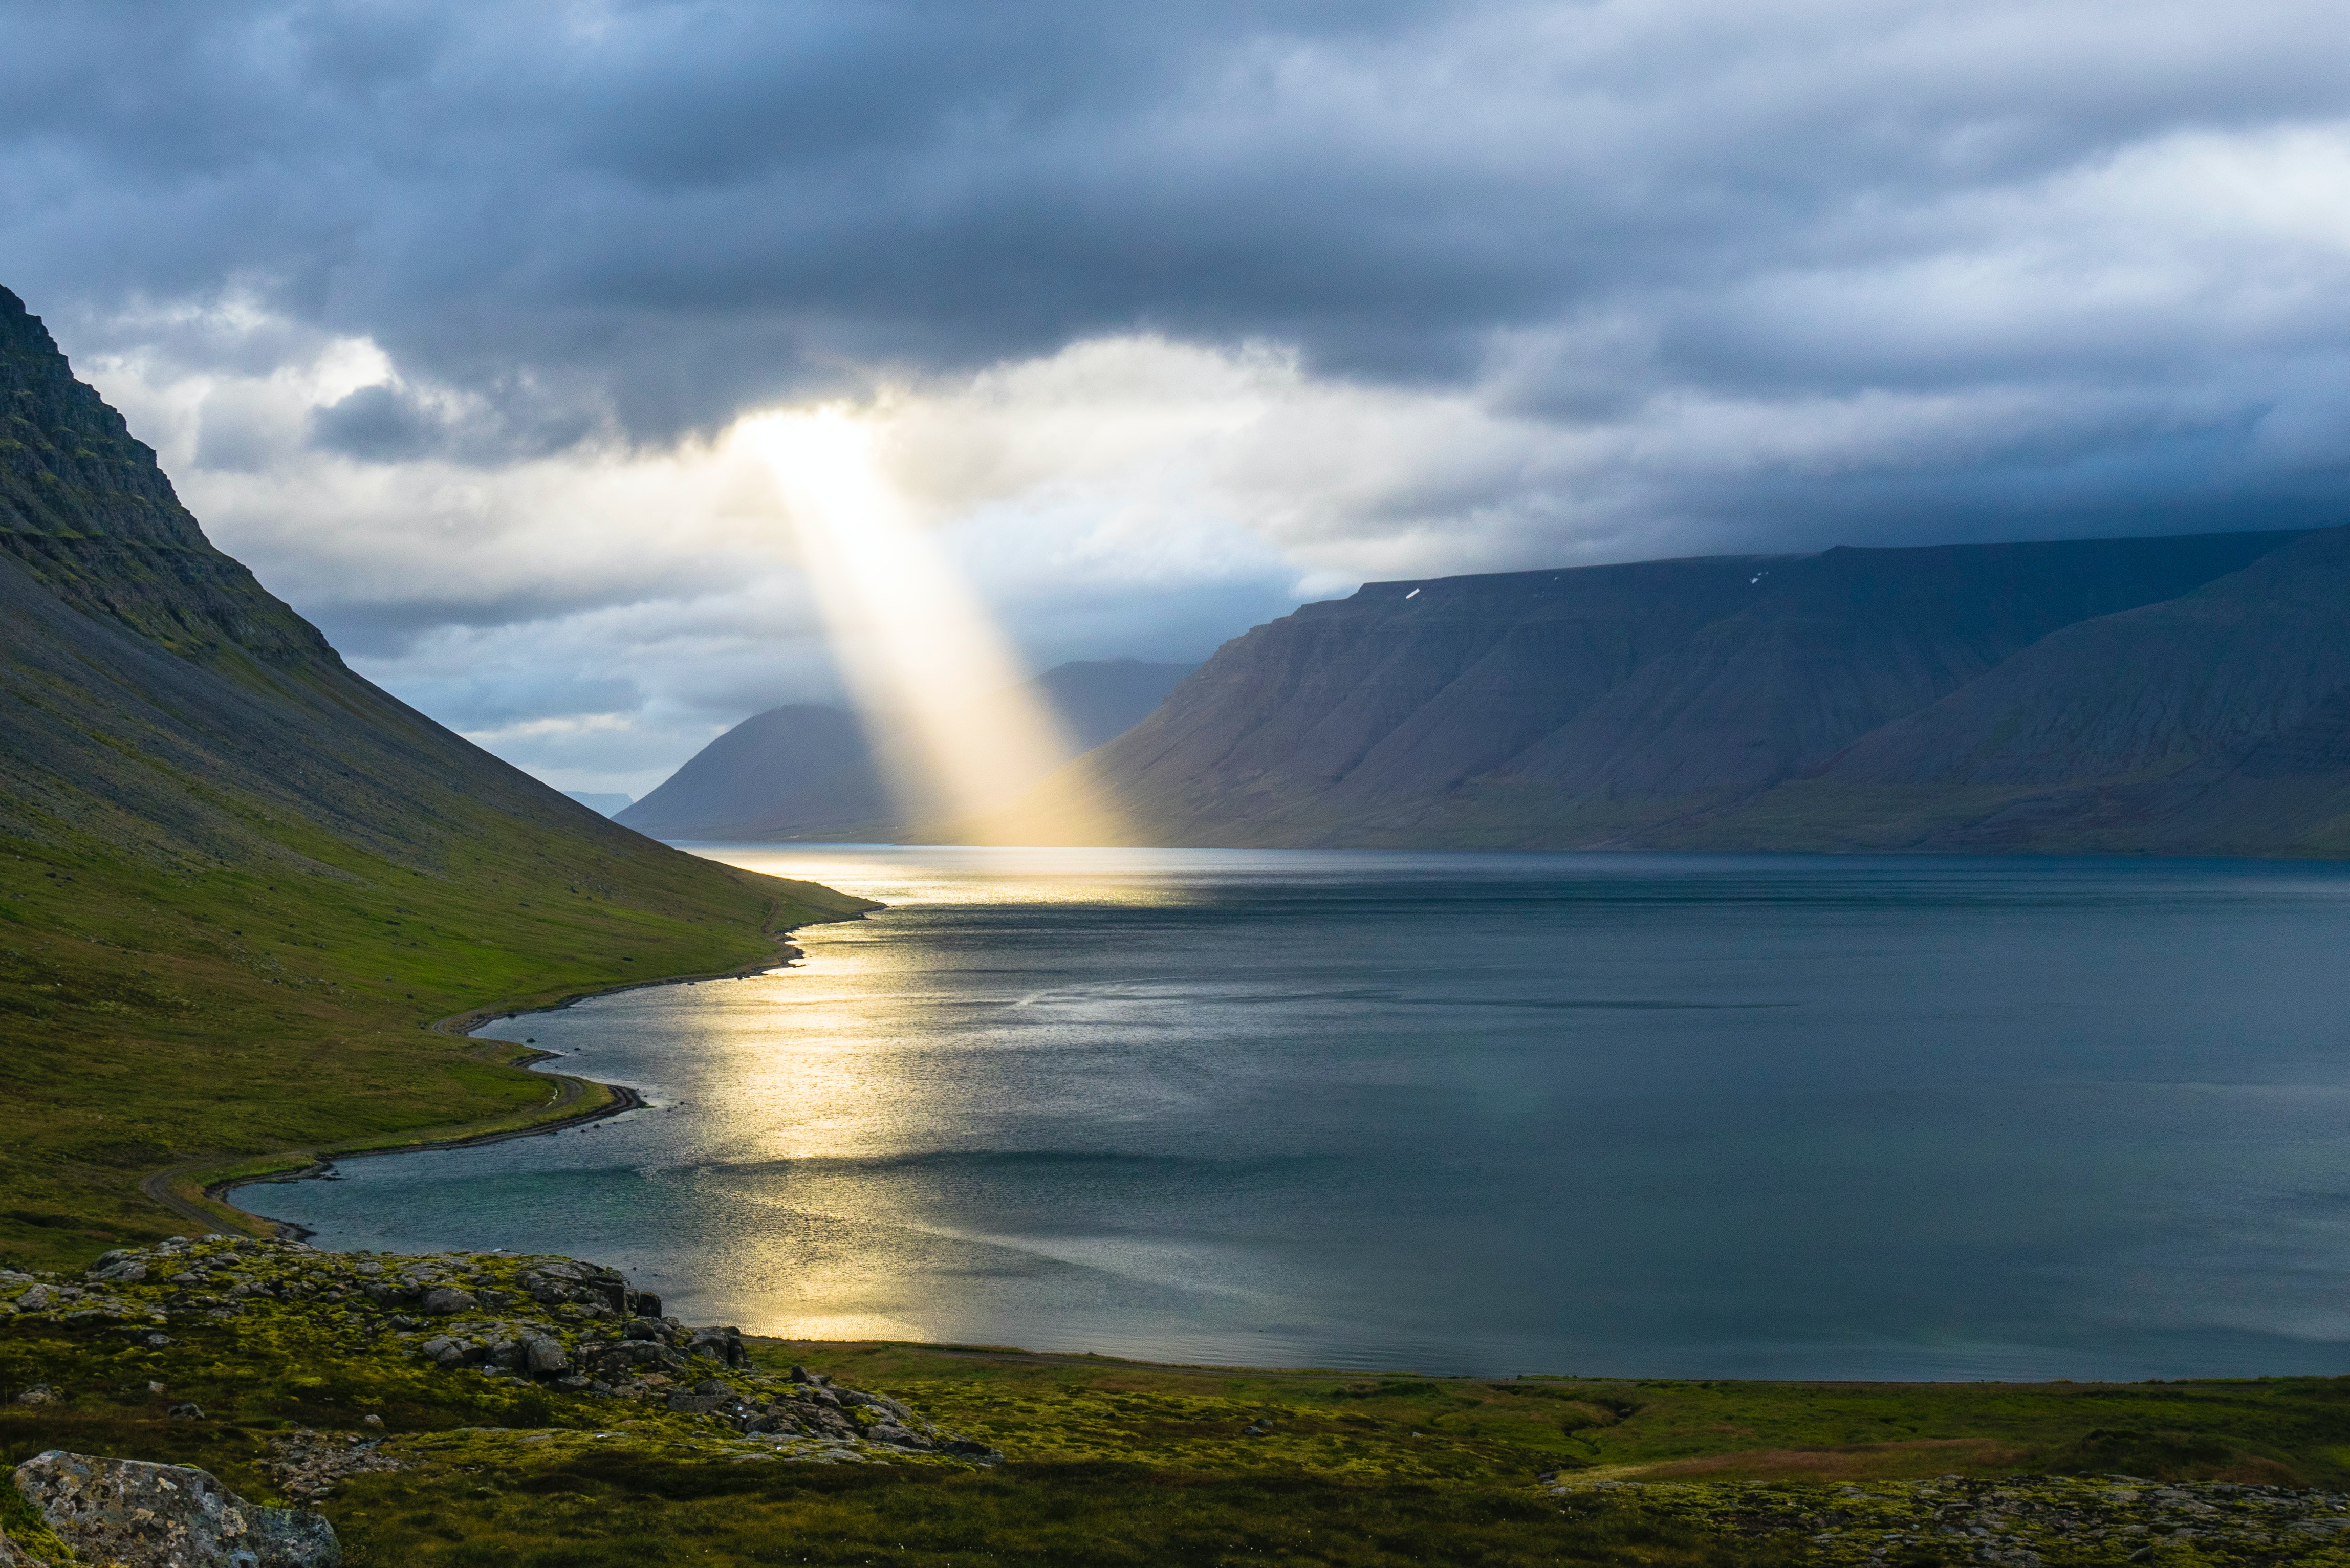 sunlight through clouds onto water and mountain